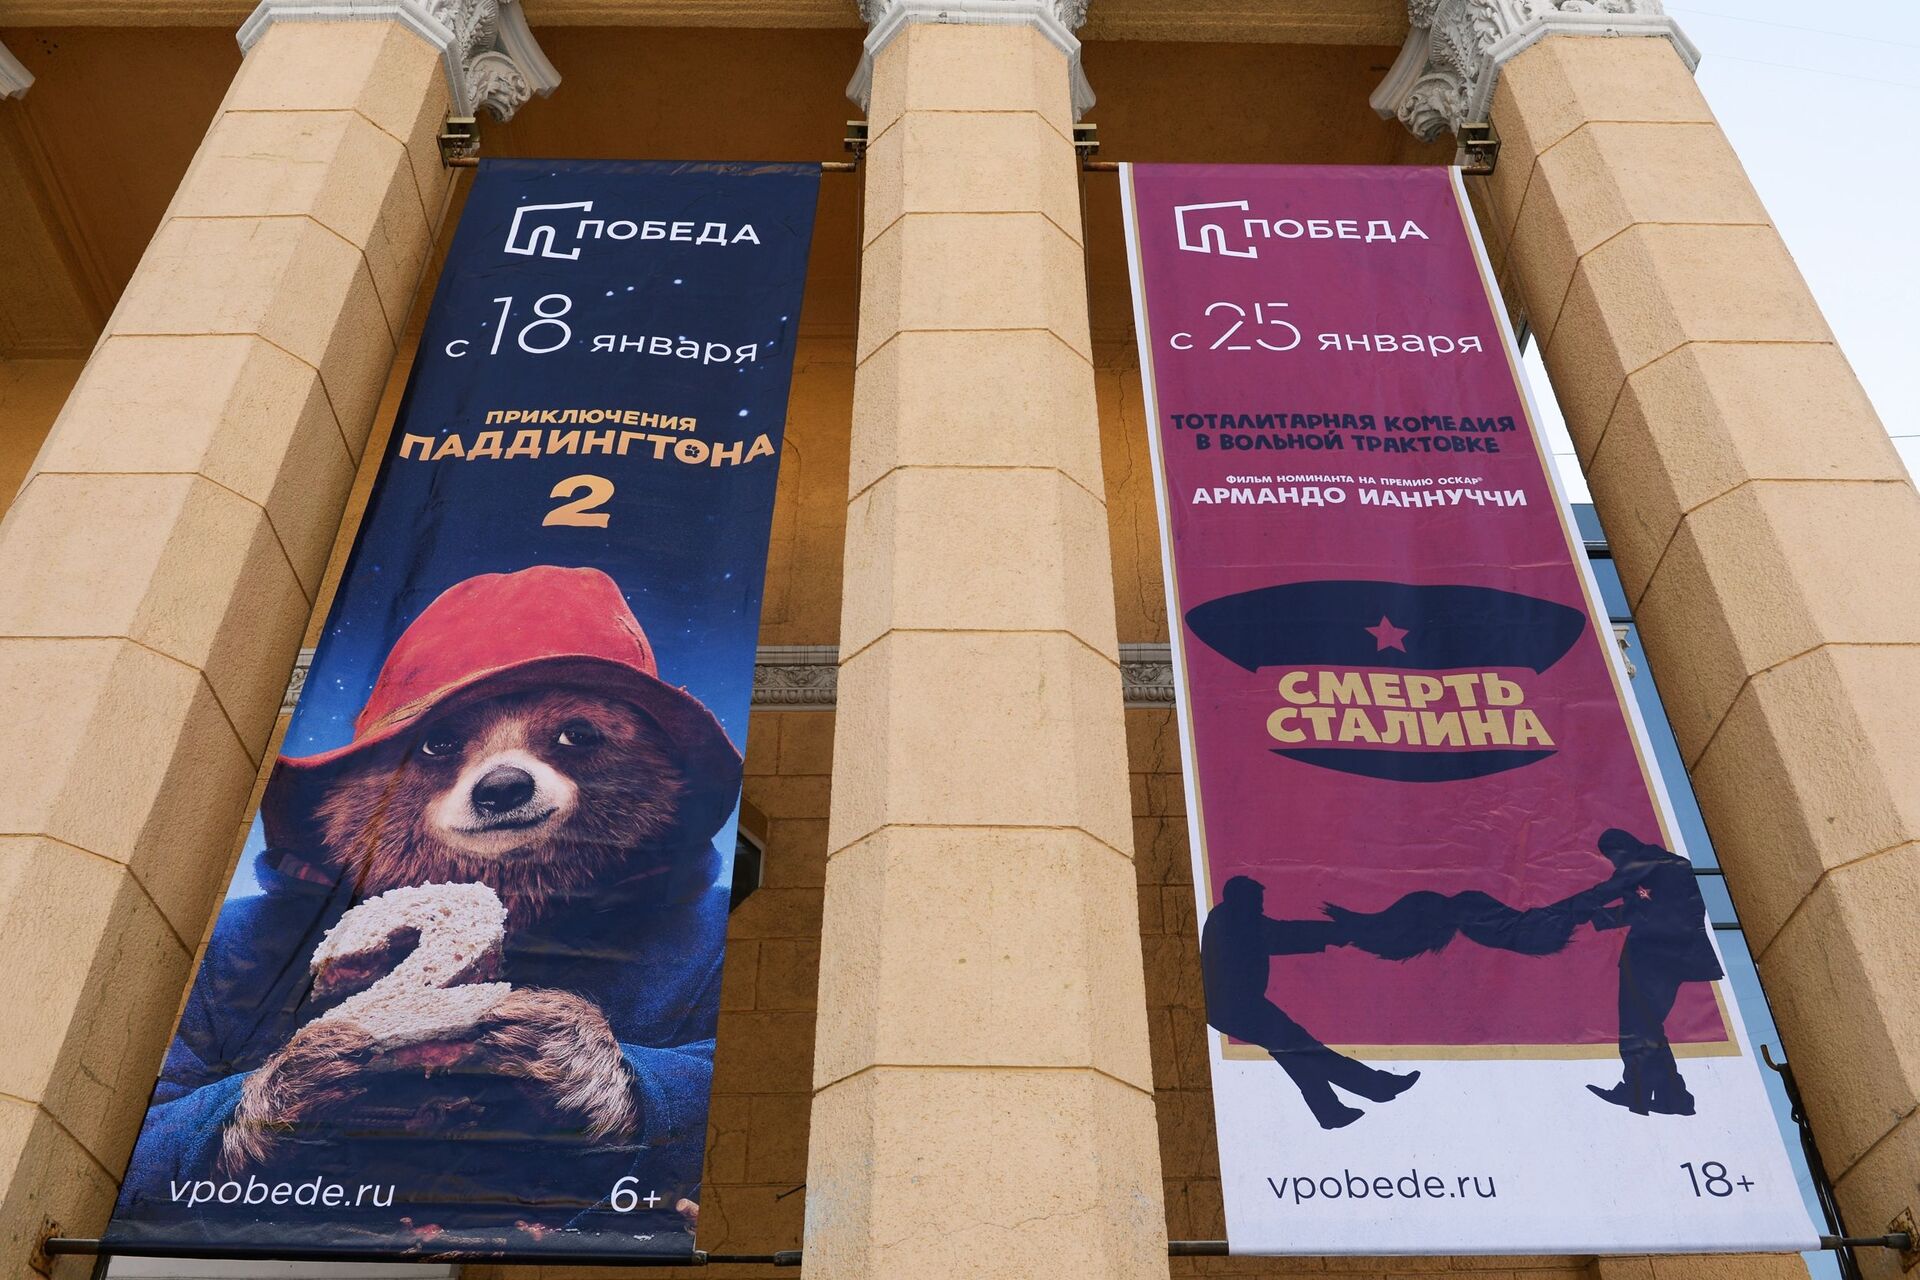 Promotional posters for the films Paddington 2 and Death of Stalin in Novosibirsk, Russia. File photo. - Sputnik International, 1920, 07.09.2021